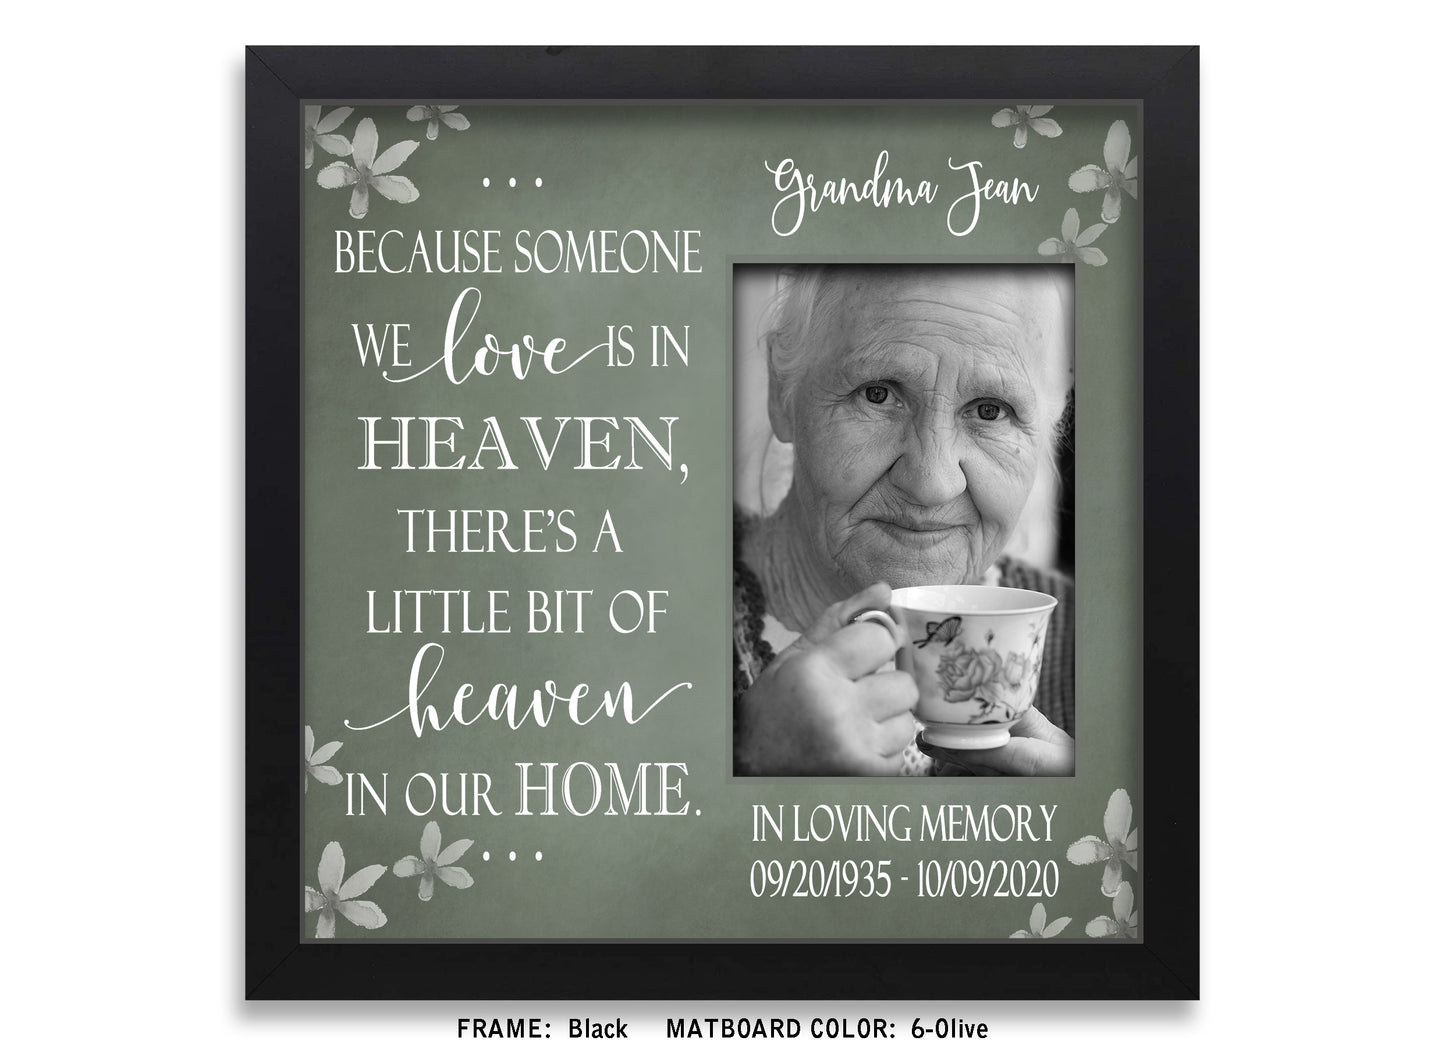 Because Someone We Love Is in Heaven Personalized Bereavement Gifts, 10x10 Picture Frame MatboardMemories   